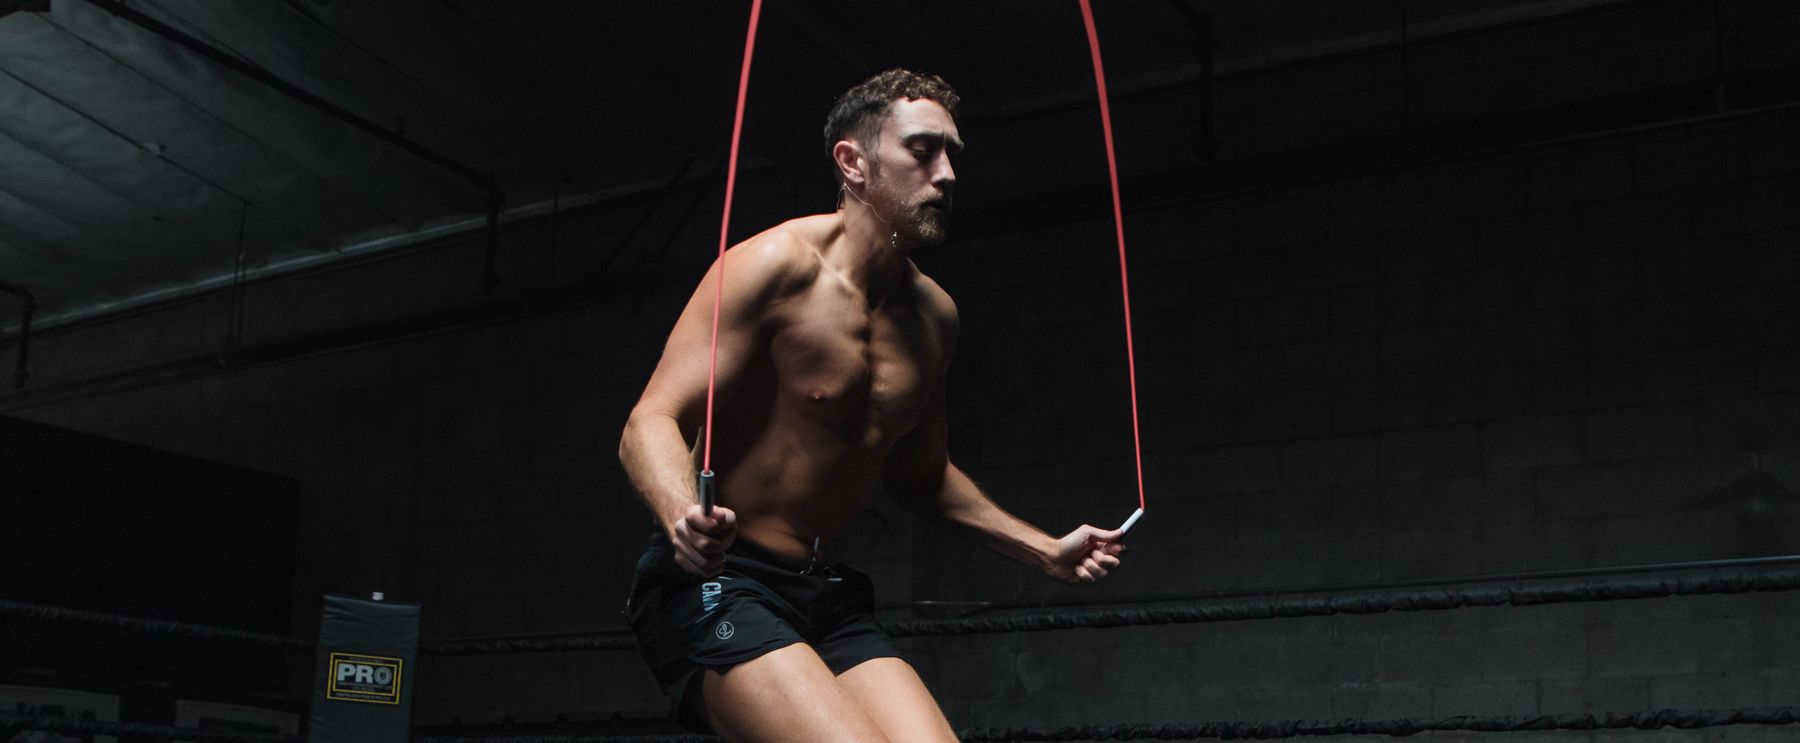 HIIT Jump Rope Workout For Quick Cardio Training